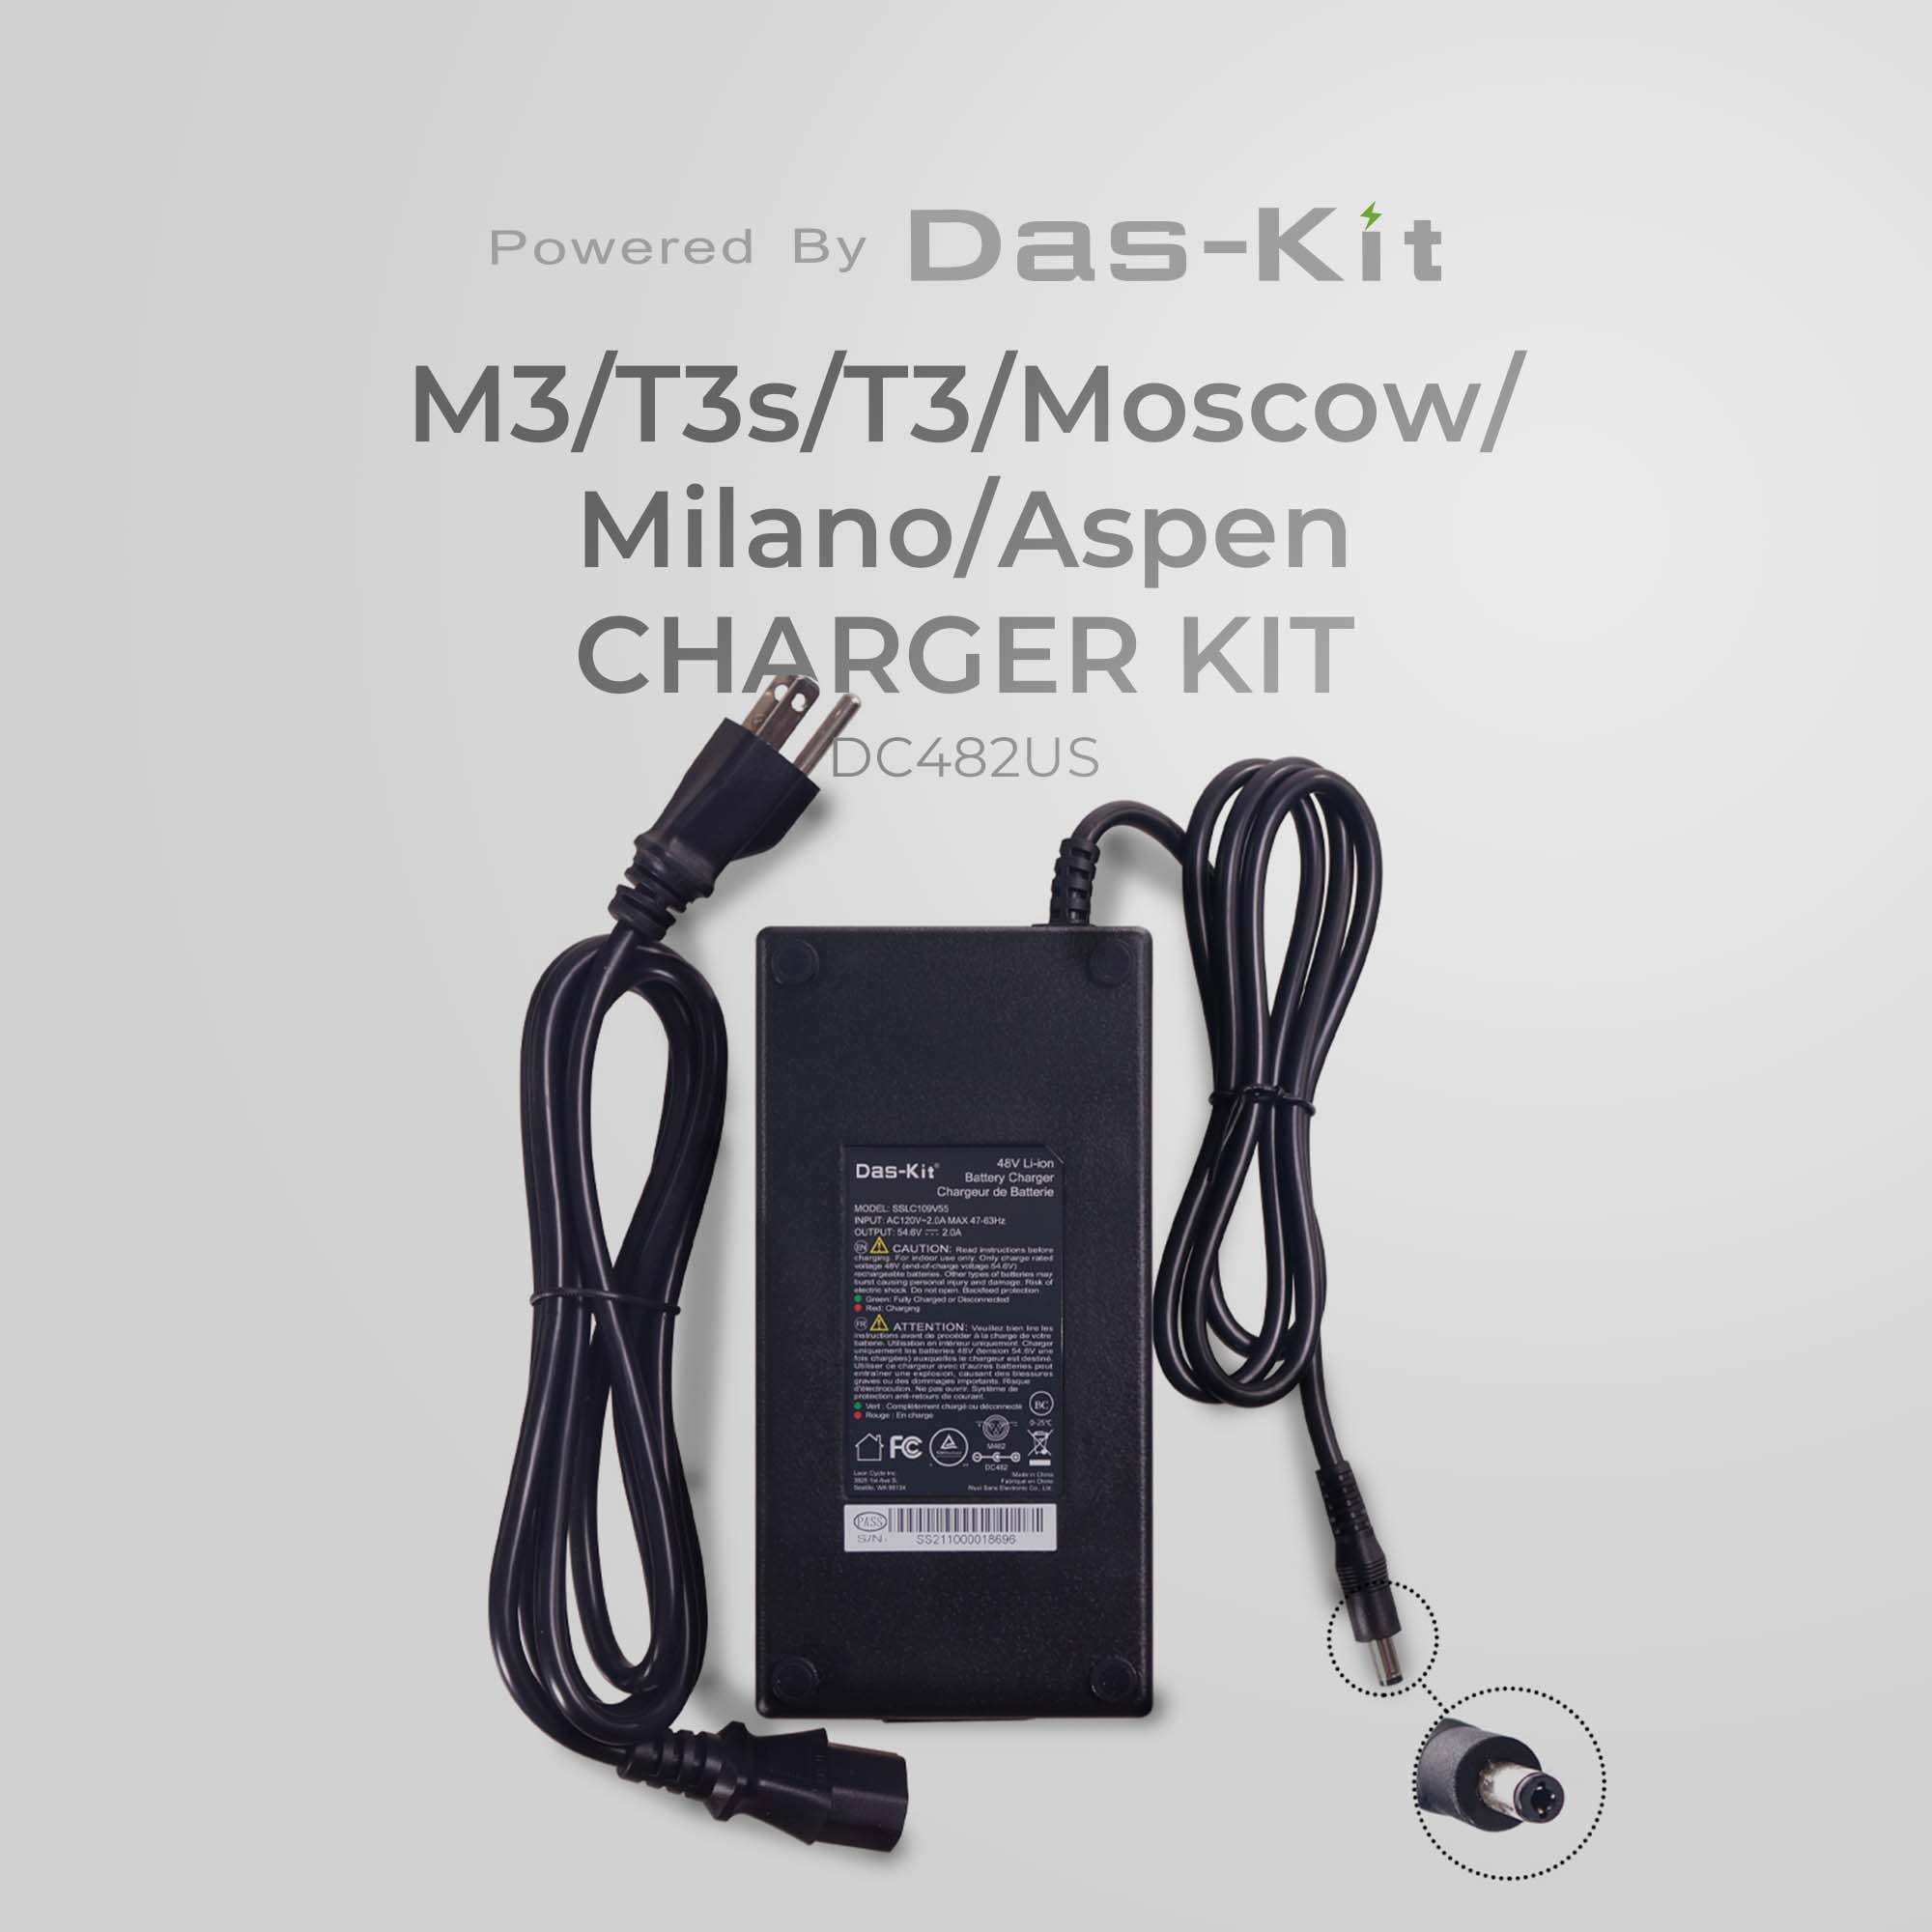 NCM M3/T3s/T3/Moscow/Milano/Aspen Charger Kit - DC482US